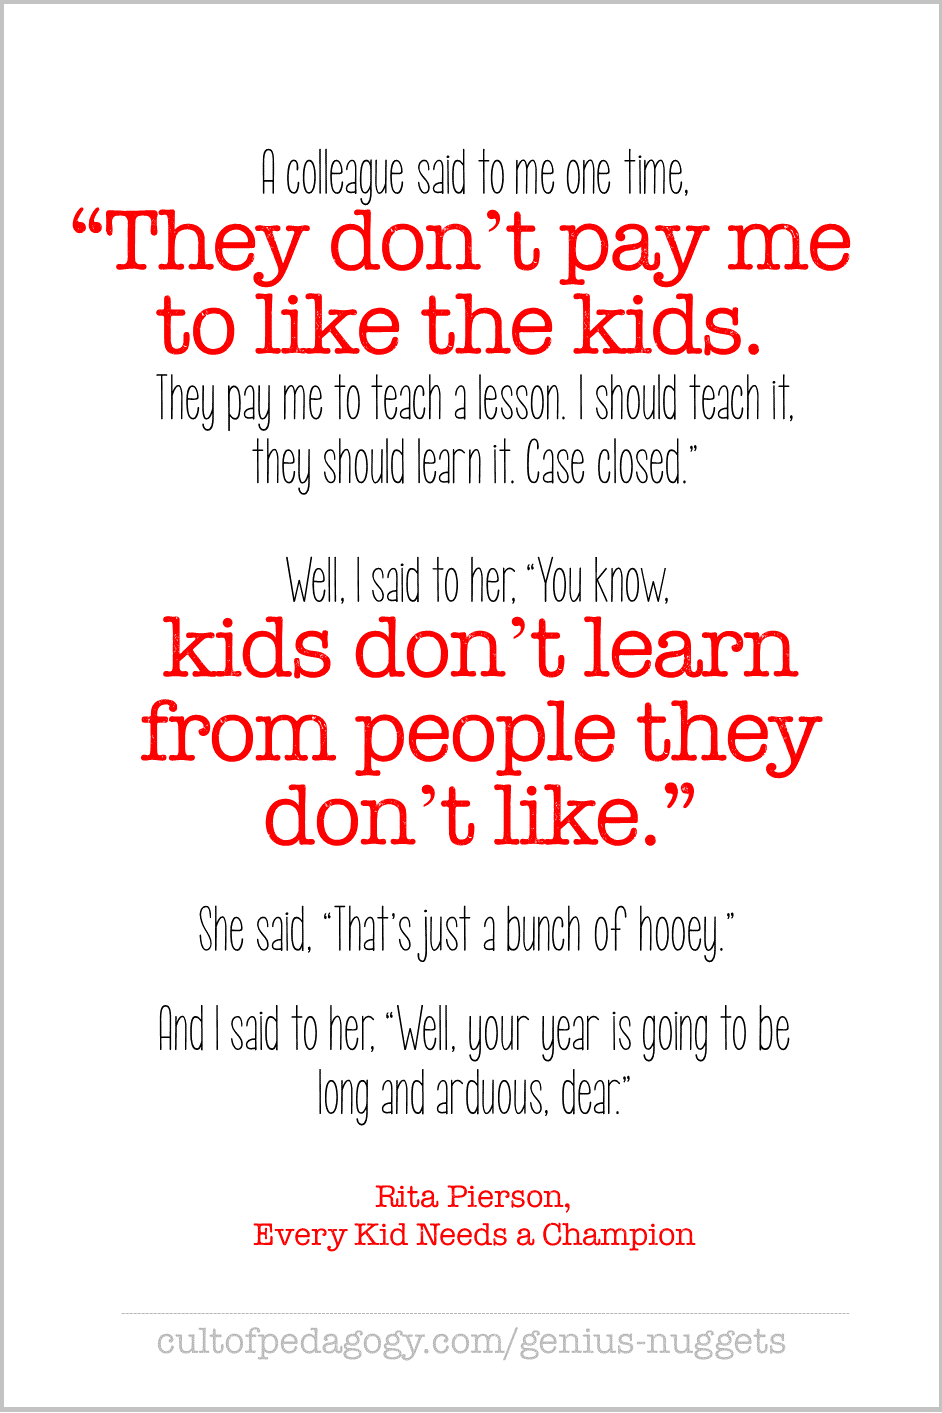 Rita Pierson quote, "Kids don't learn from people they don't like."